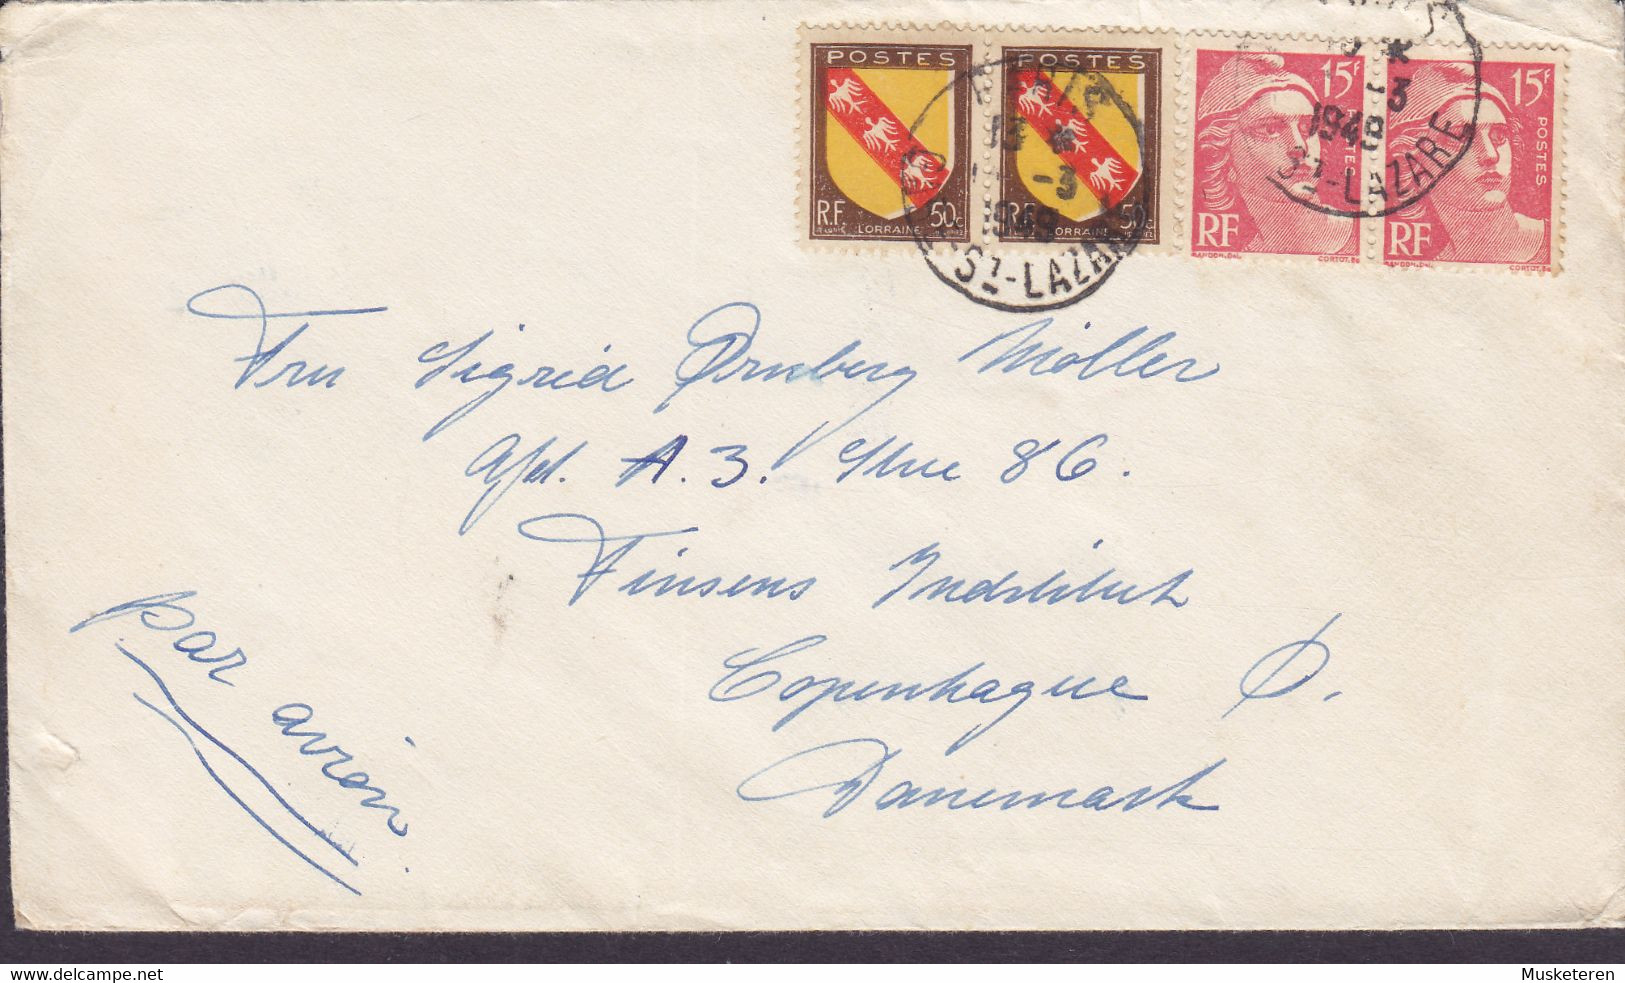 France PARIS St. Lazaire 1948 Cover Lettre FINSEN Institut Denmark ERROR Variety 'Misplaced Yellow Print' (2 Scans) - Covers & Documents